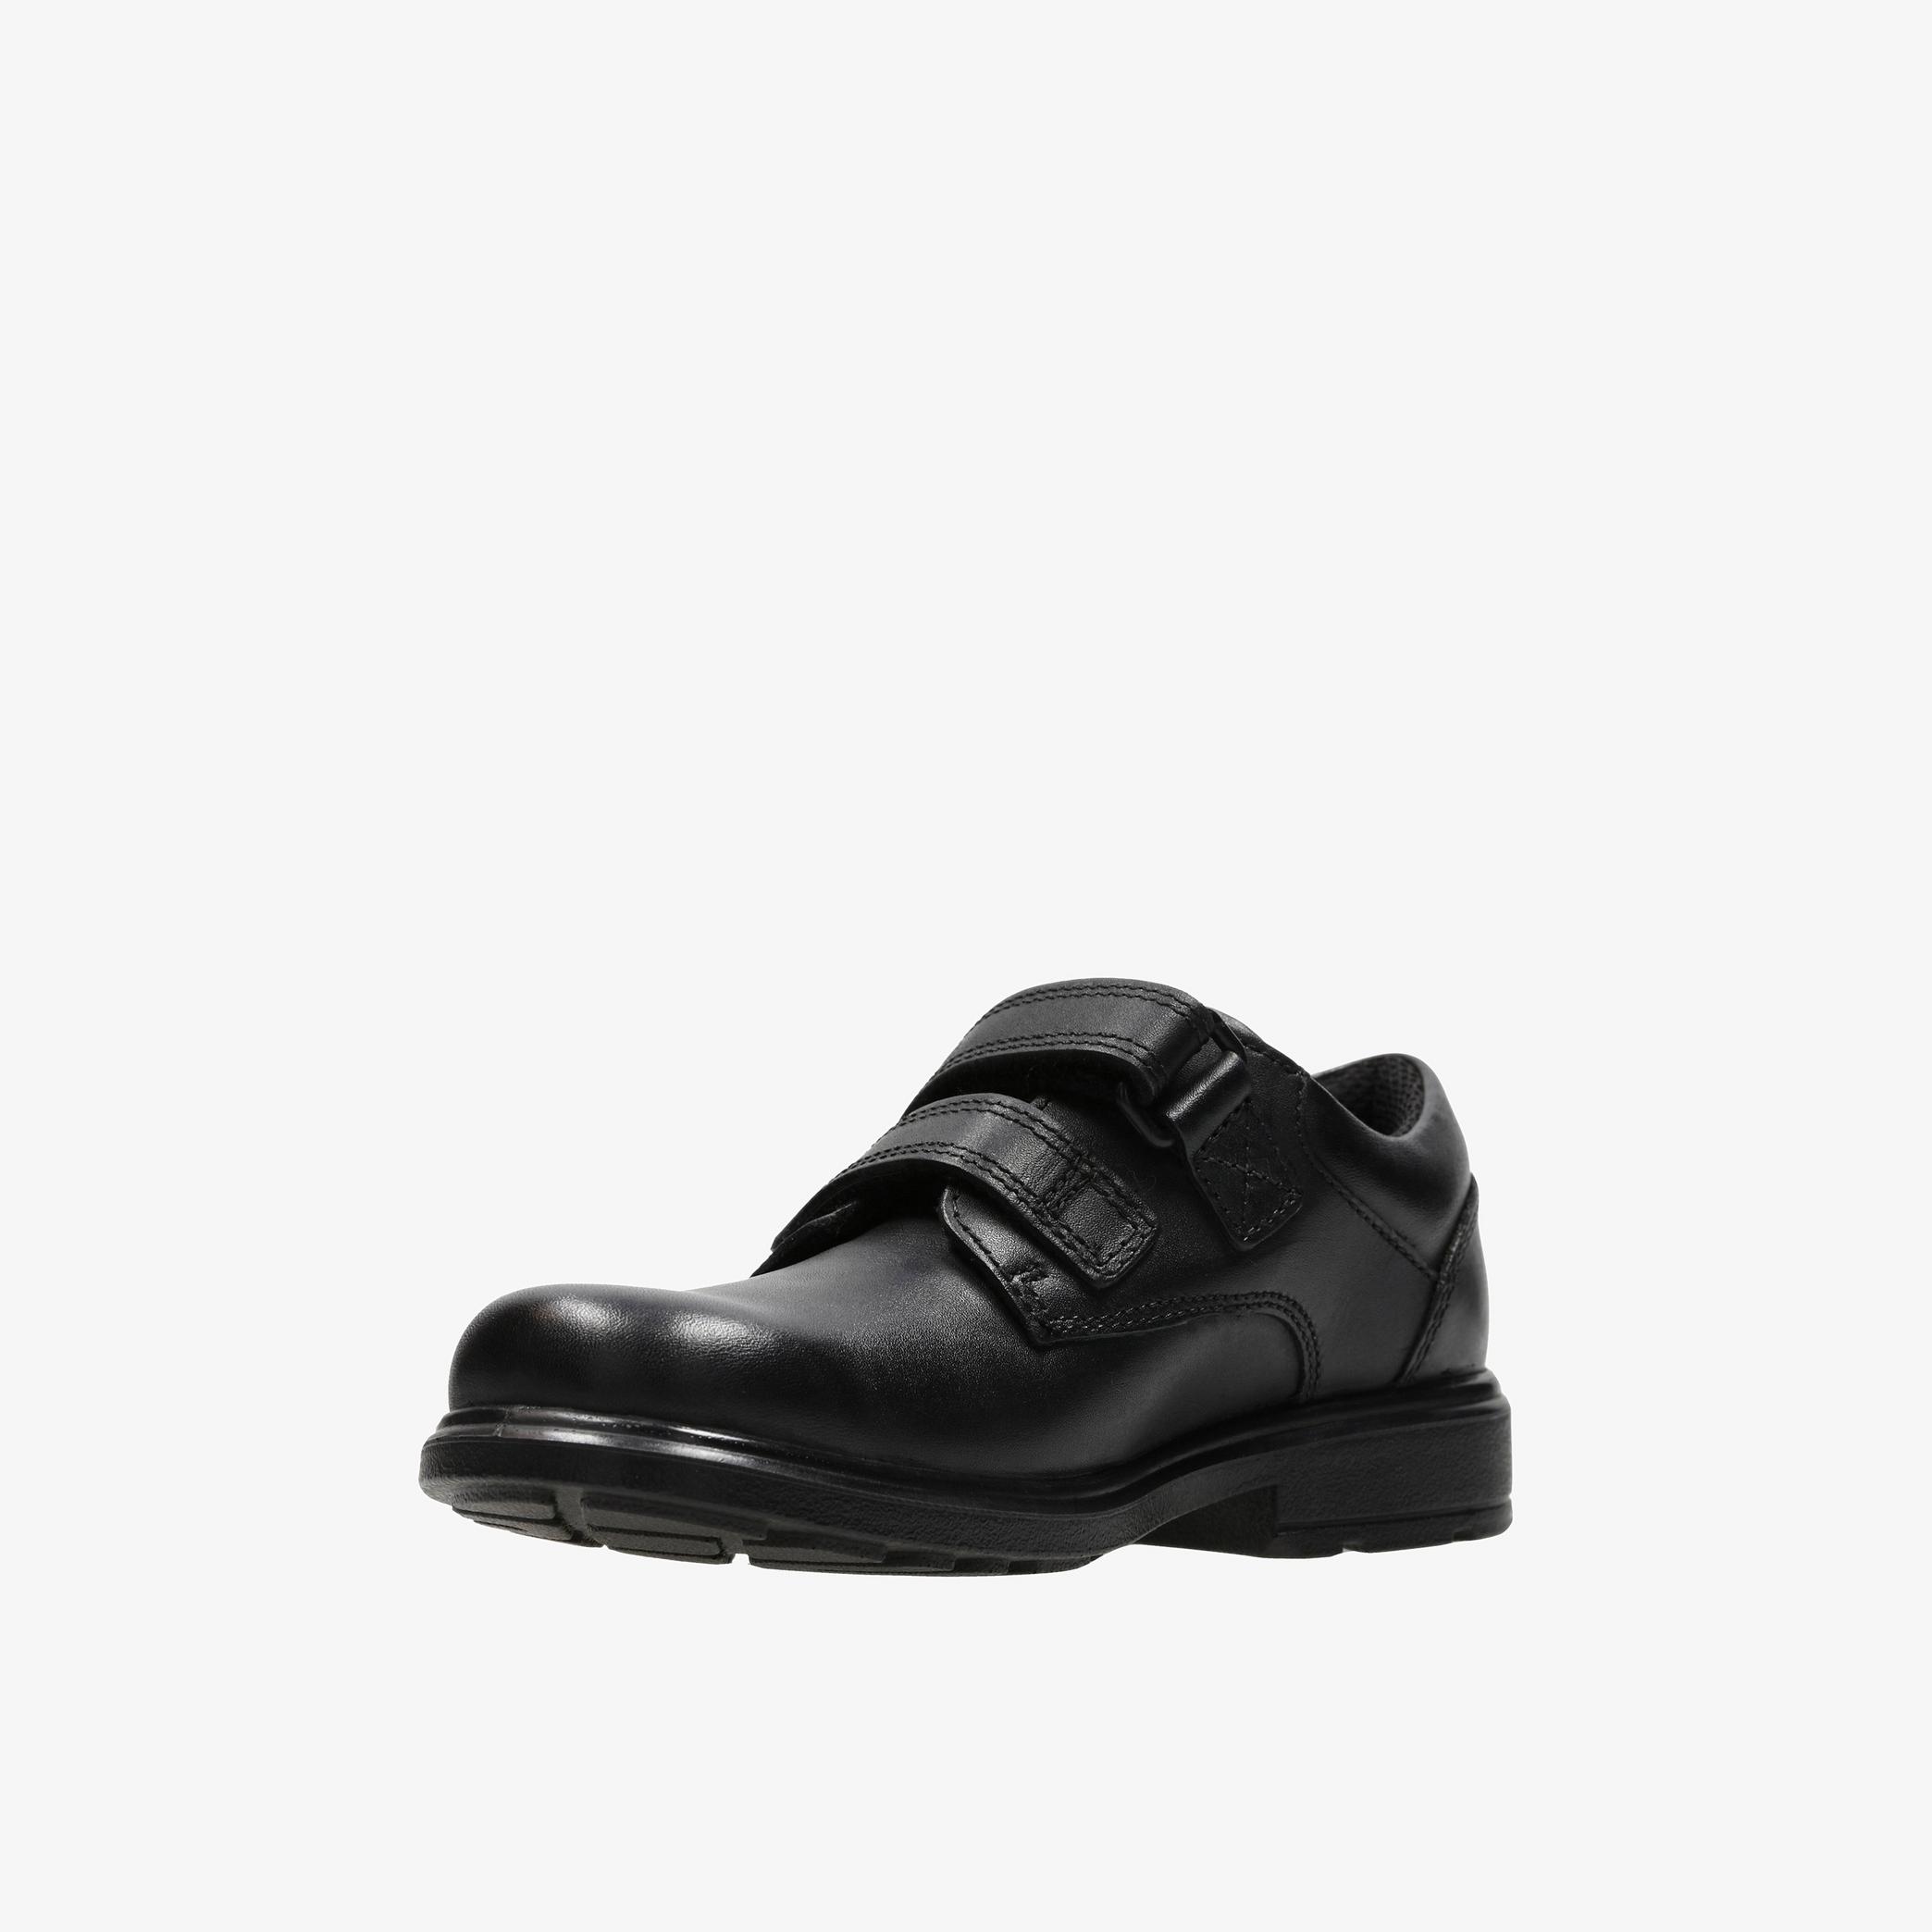 Remi Pace Kid Black Leather Shoes, view 4 of 6